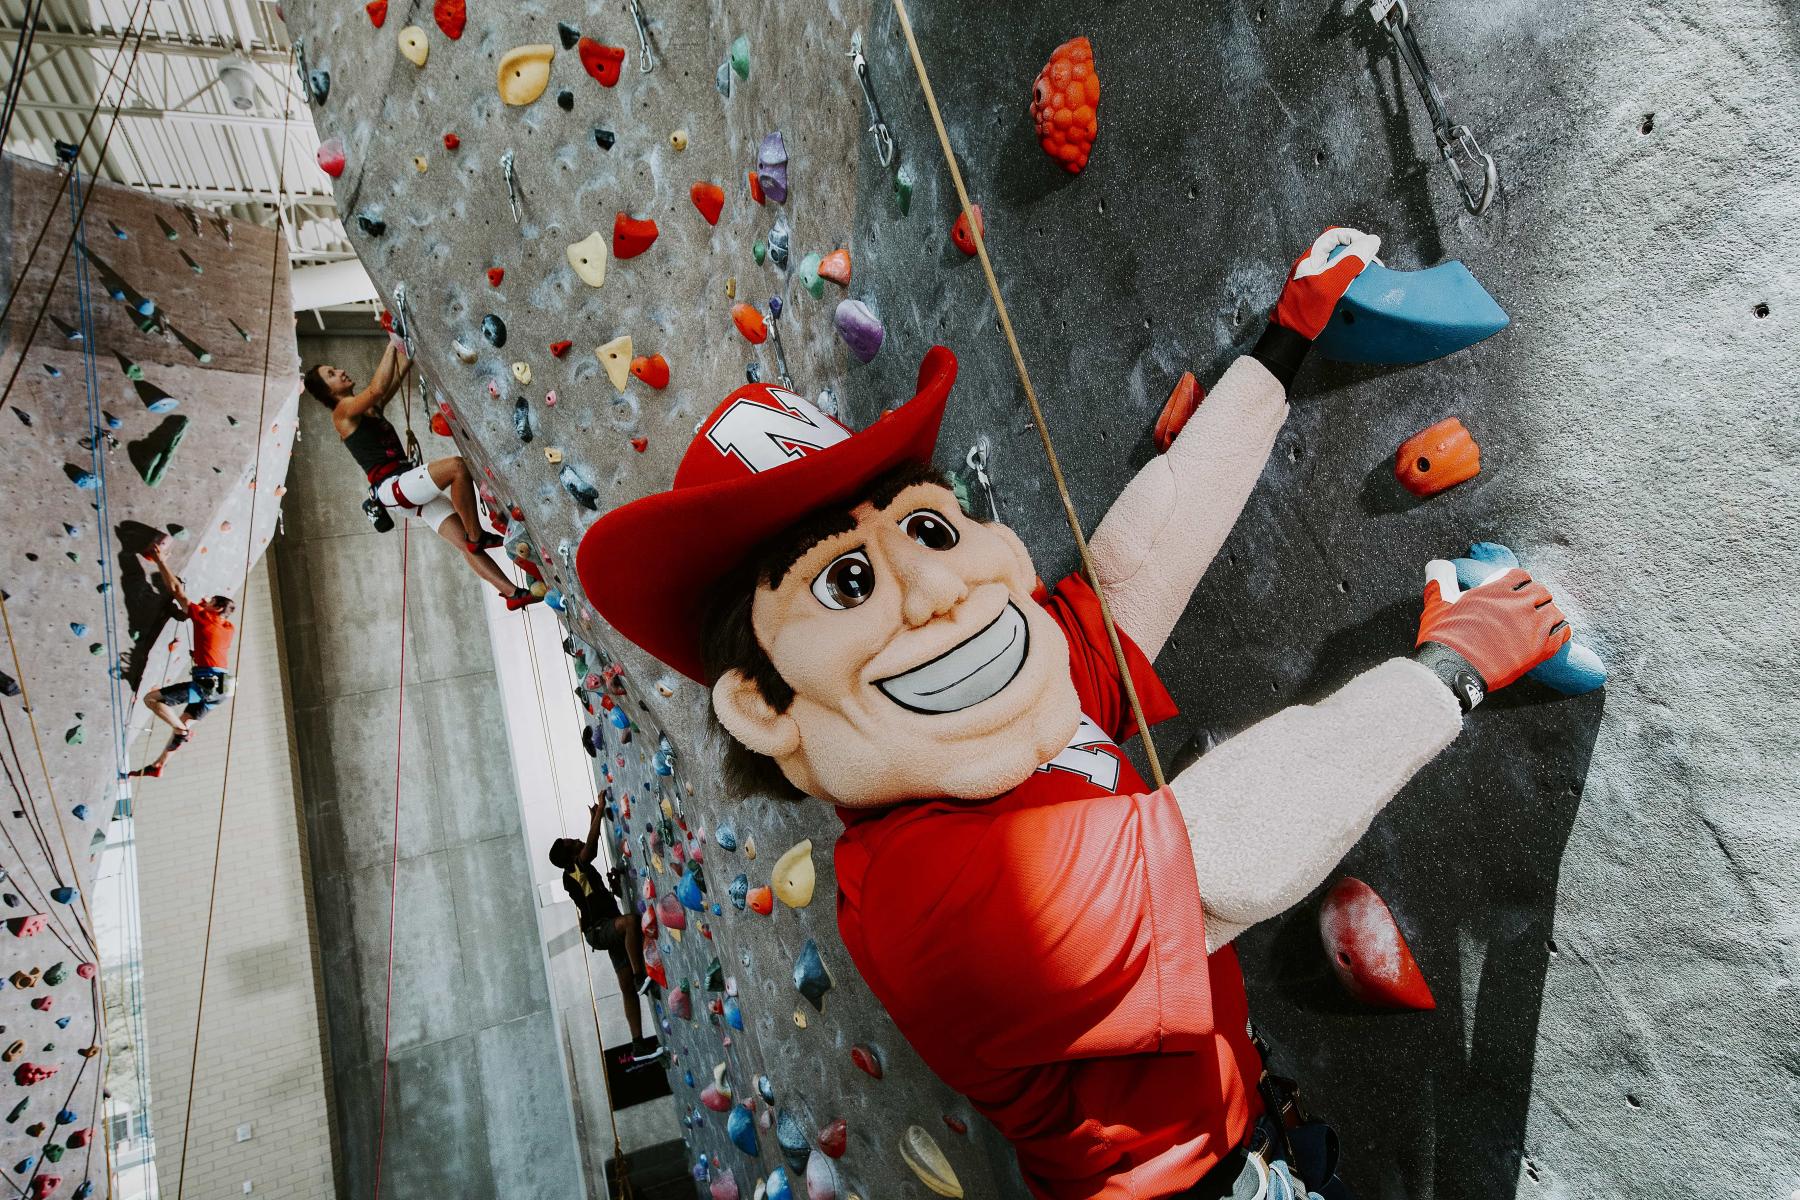 Herbie Husker climbs the climbing wall in the Outdoor Adventures Center